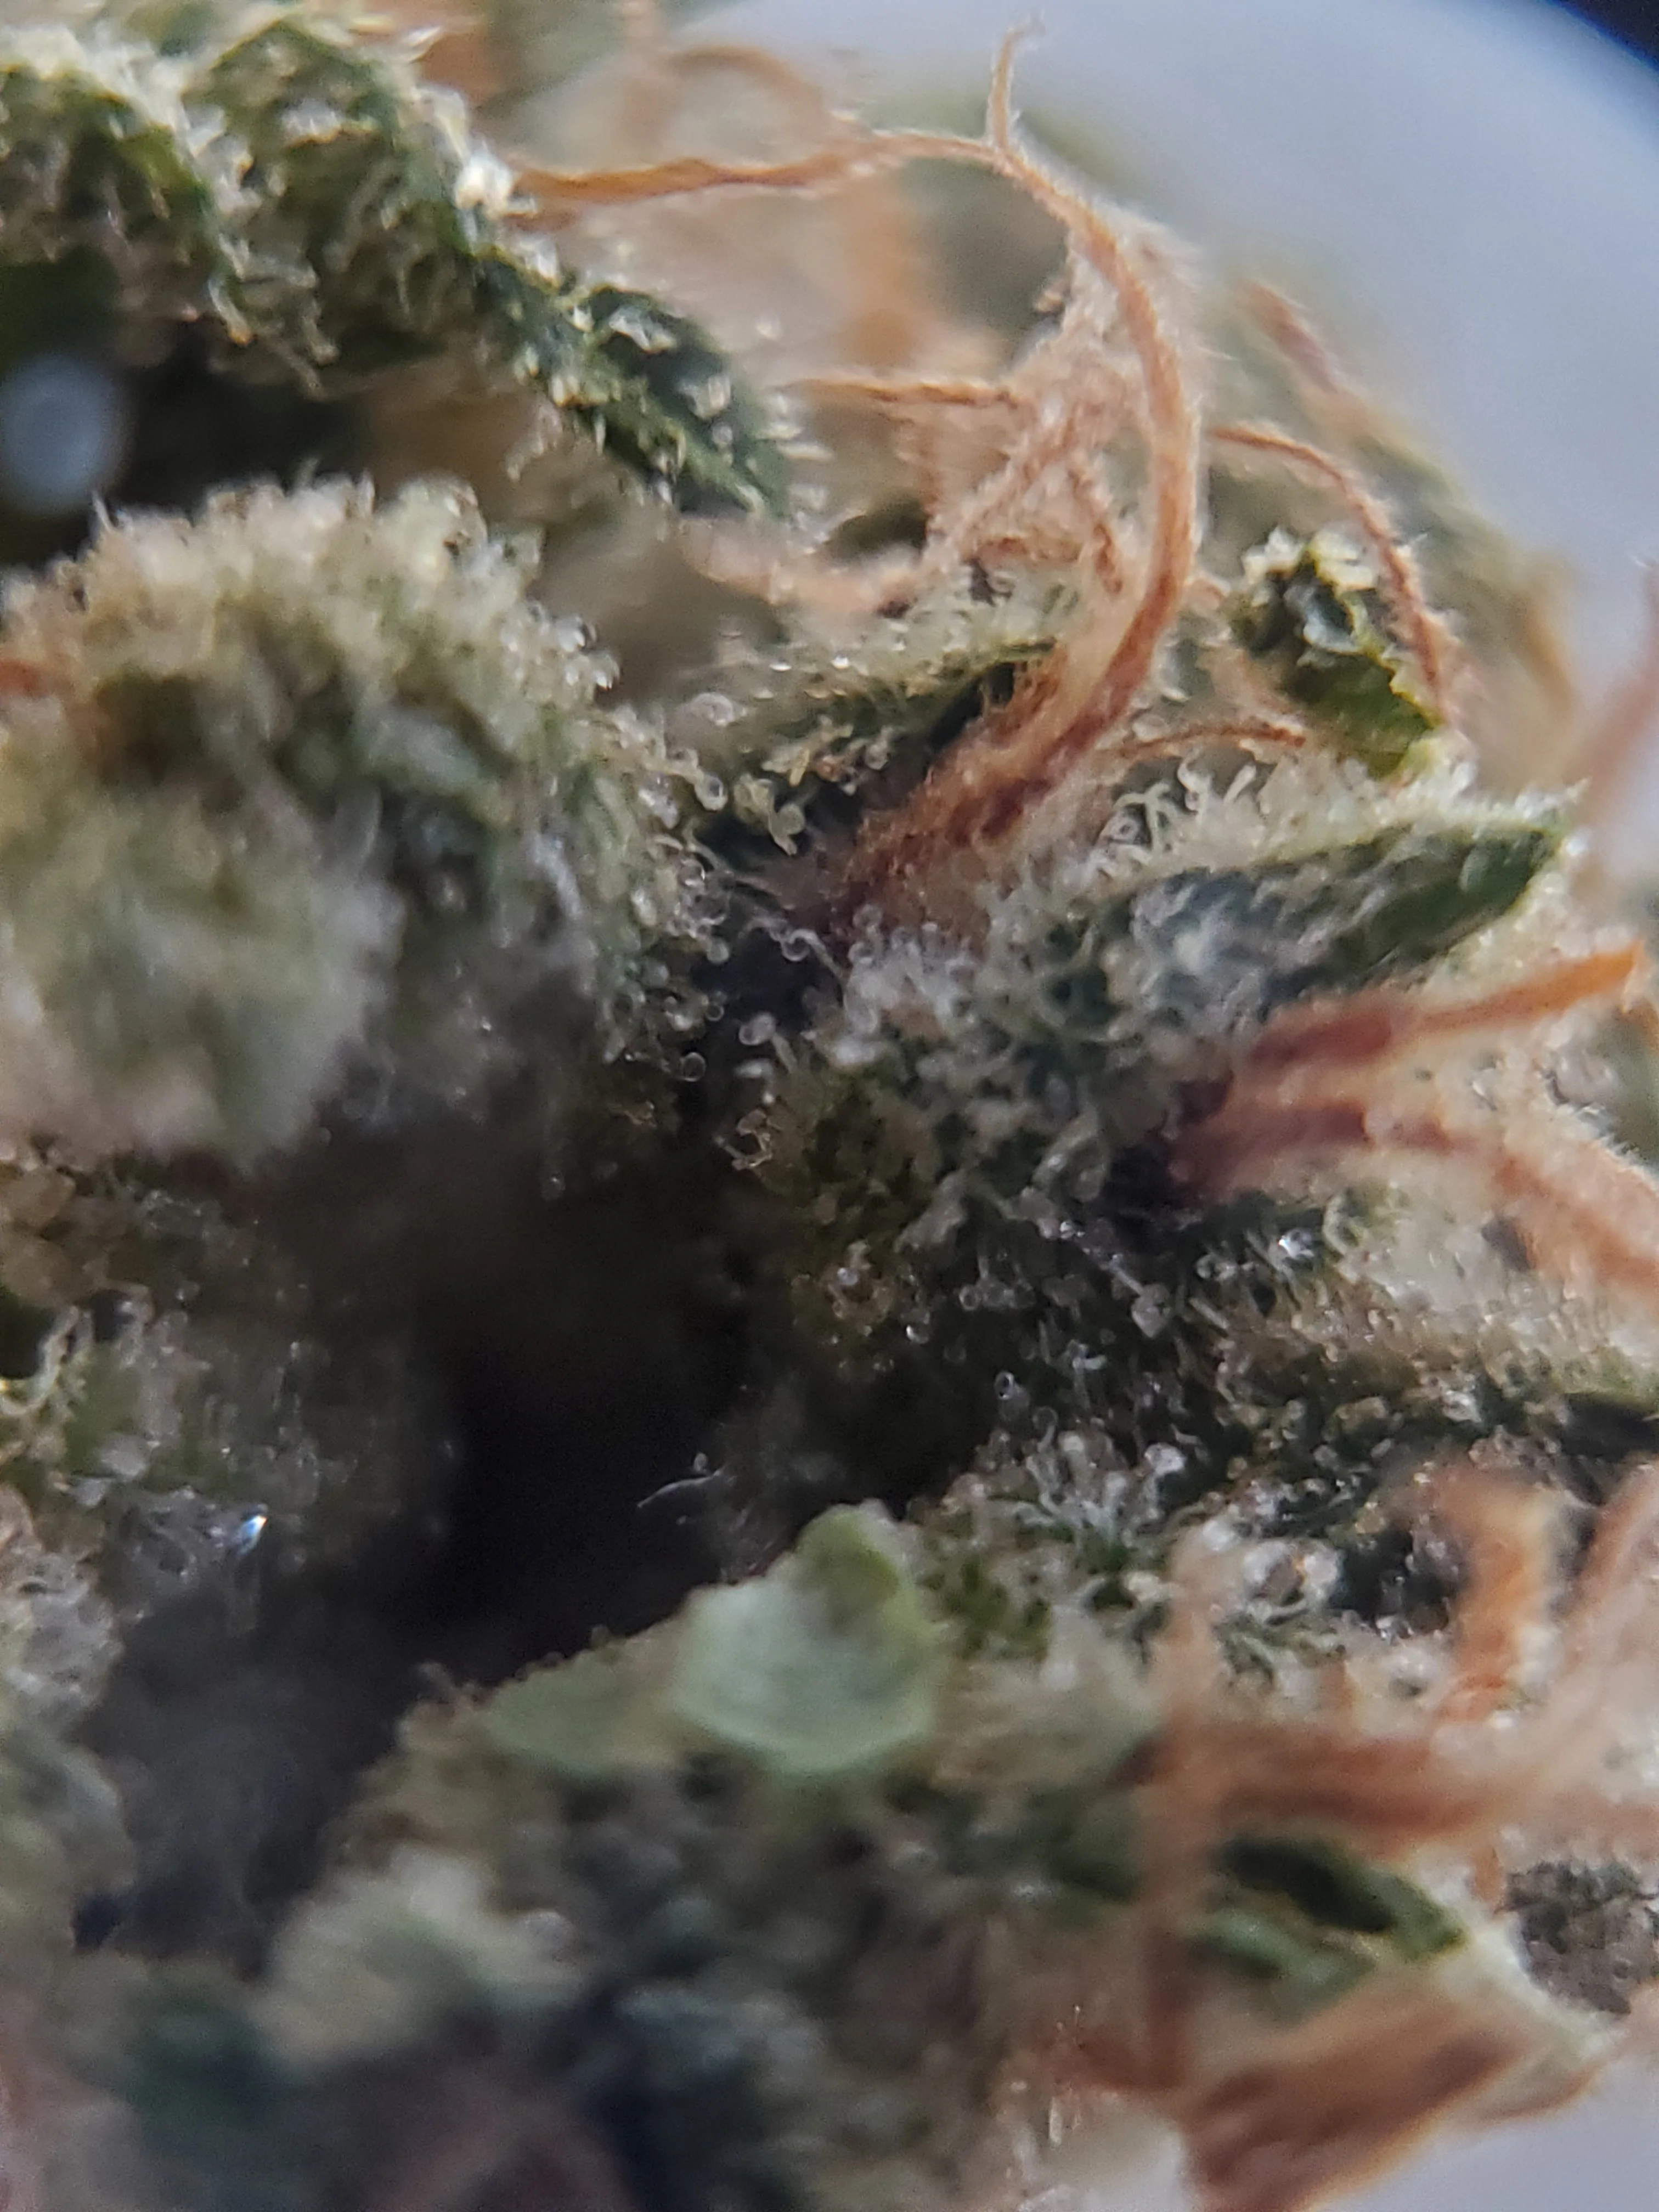 Canadian Cannabis Cultivar Photos - Godbud by Redecan Cannabis Indica Weed Review - Stashmagazine.ca